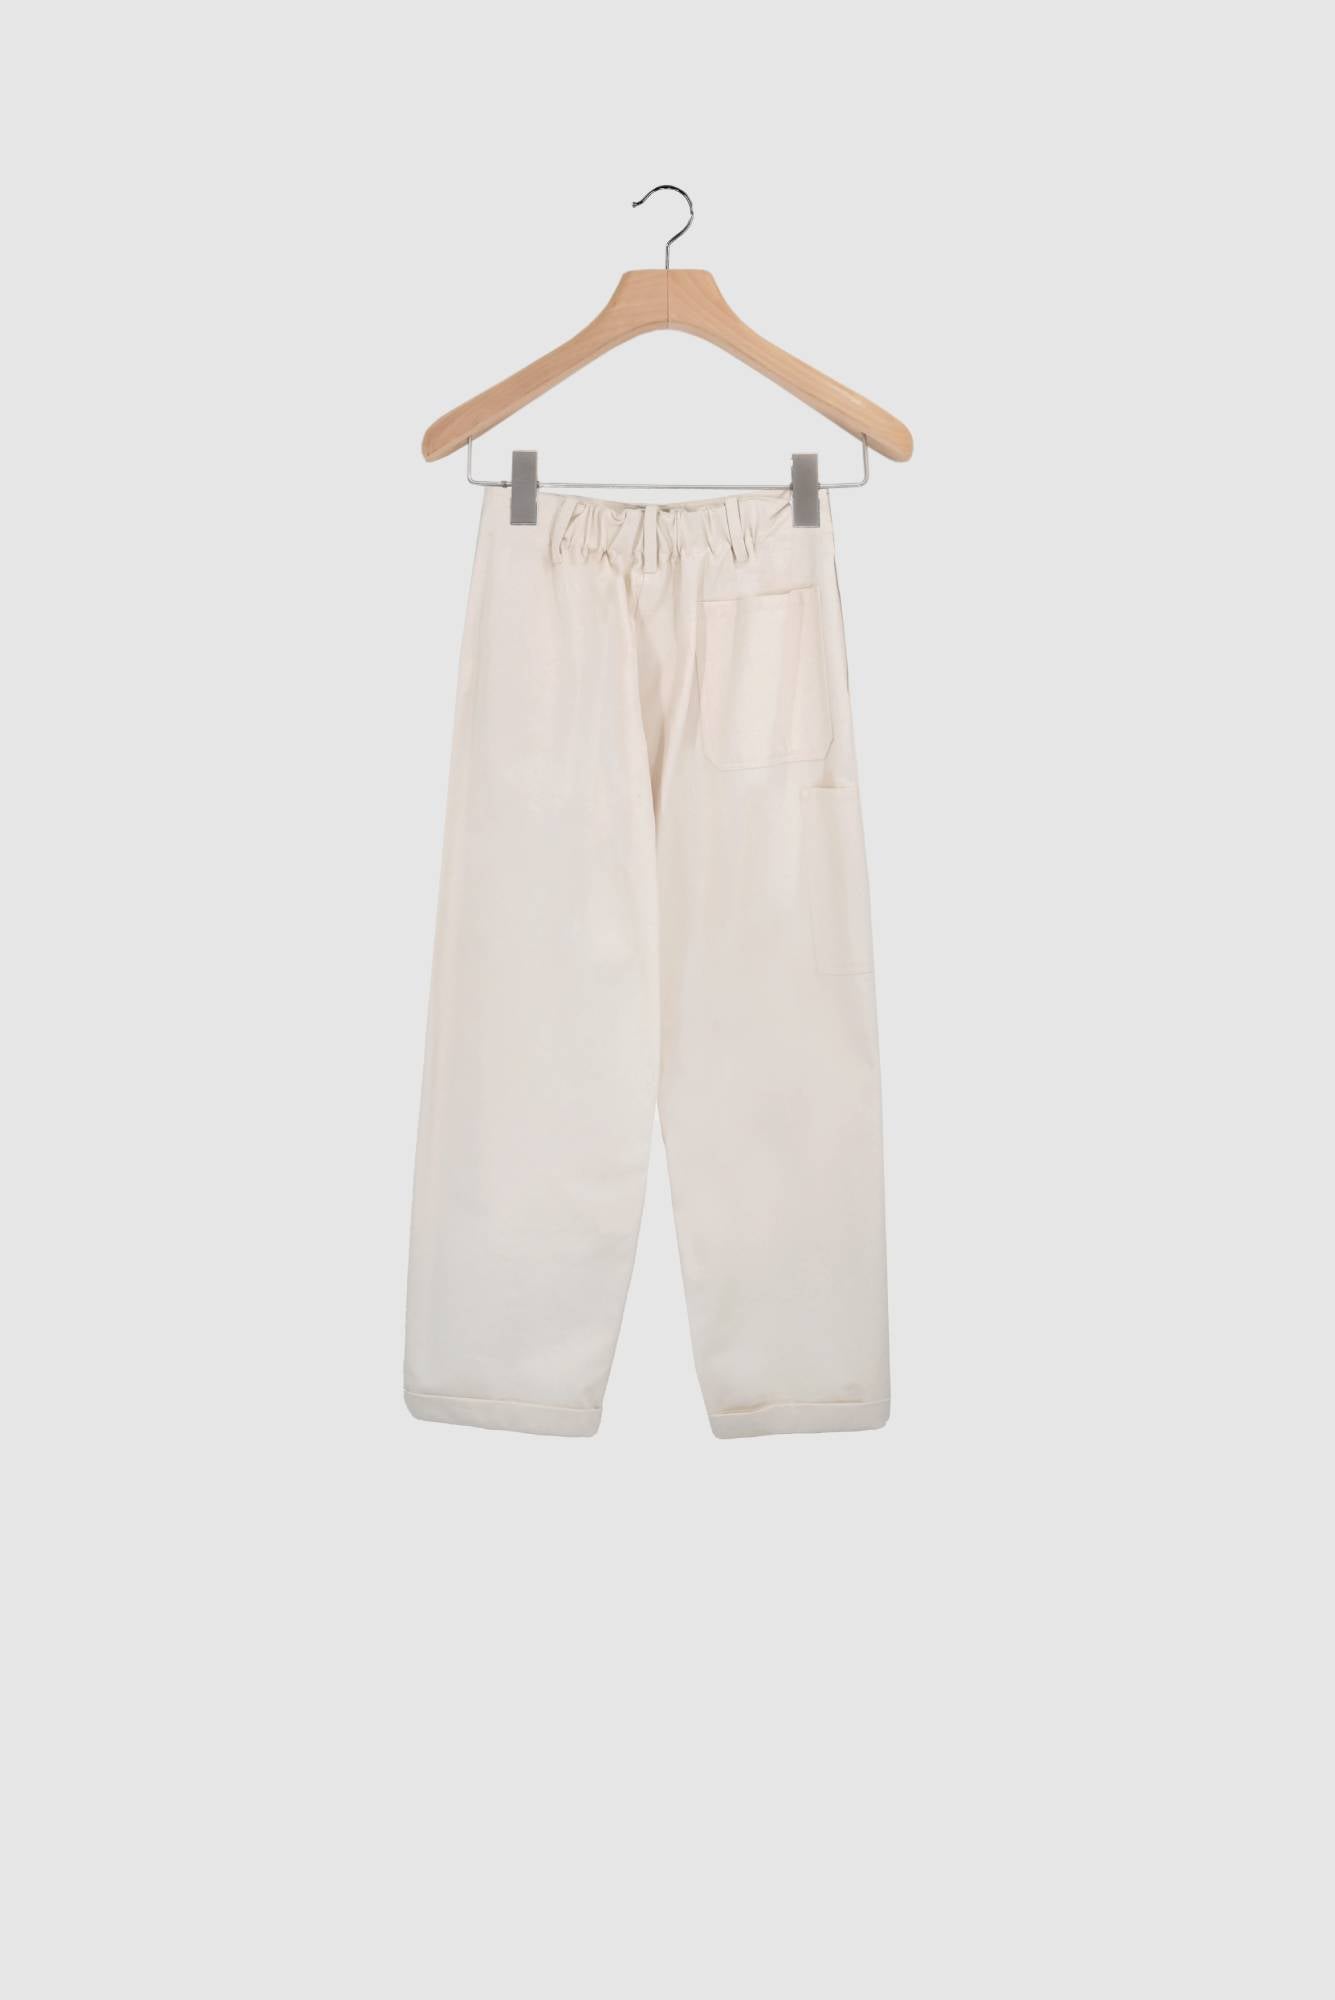 TOM - Cotton Twill Pants in in Undyed/Natural